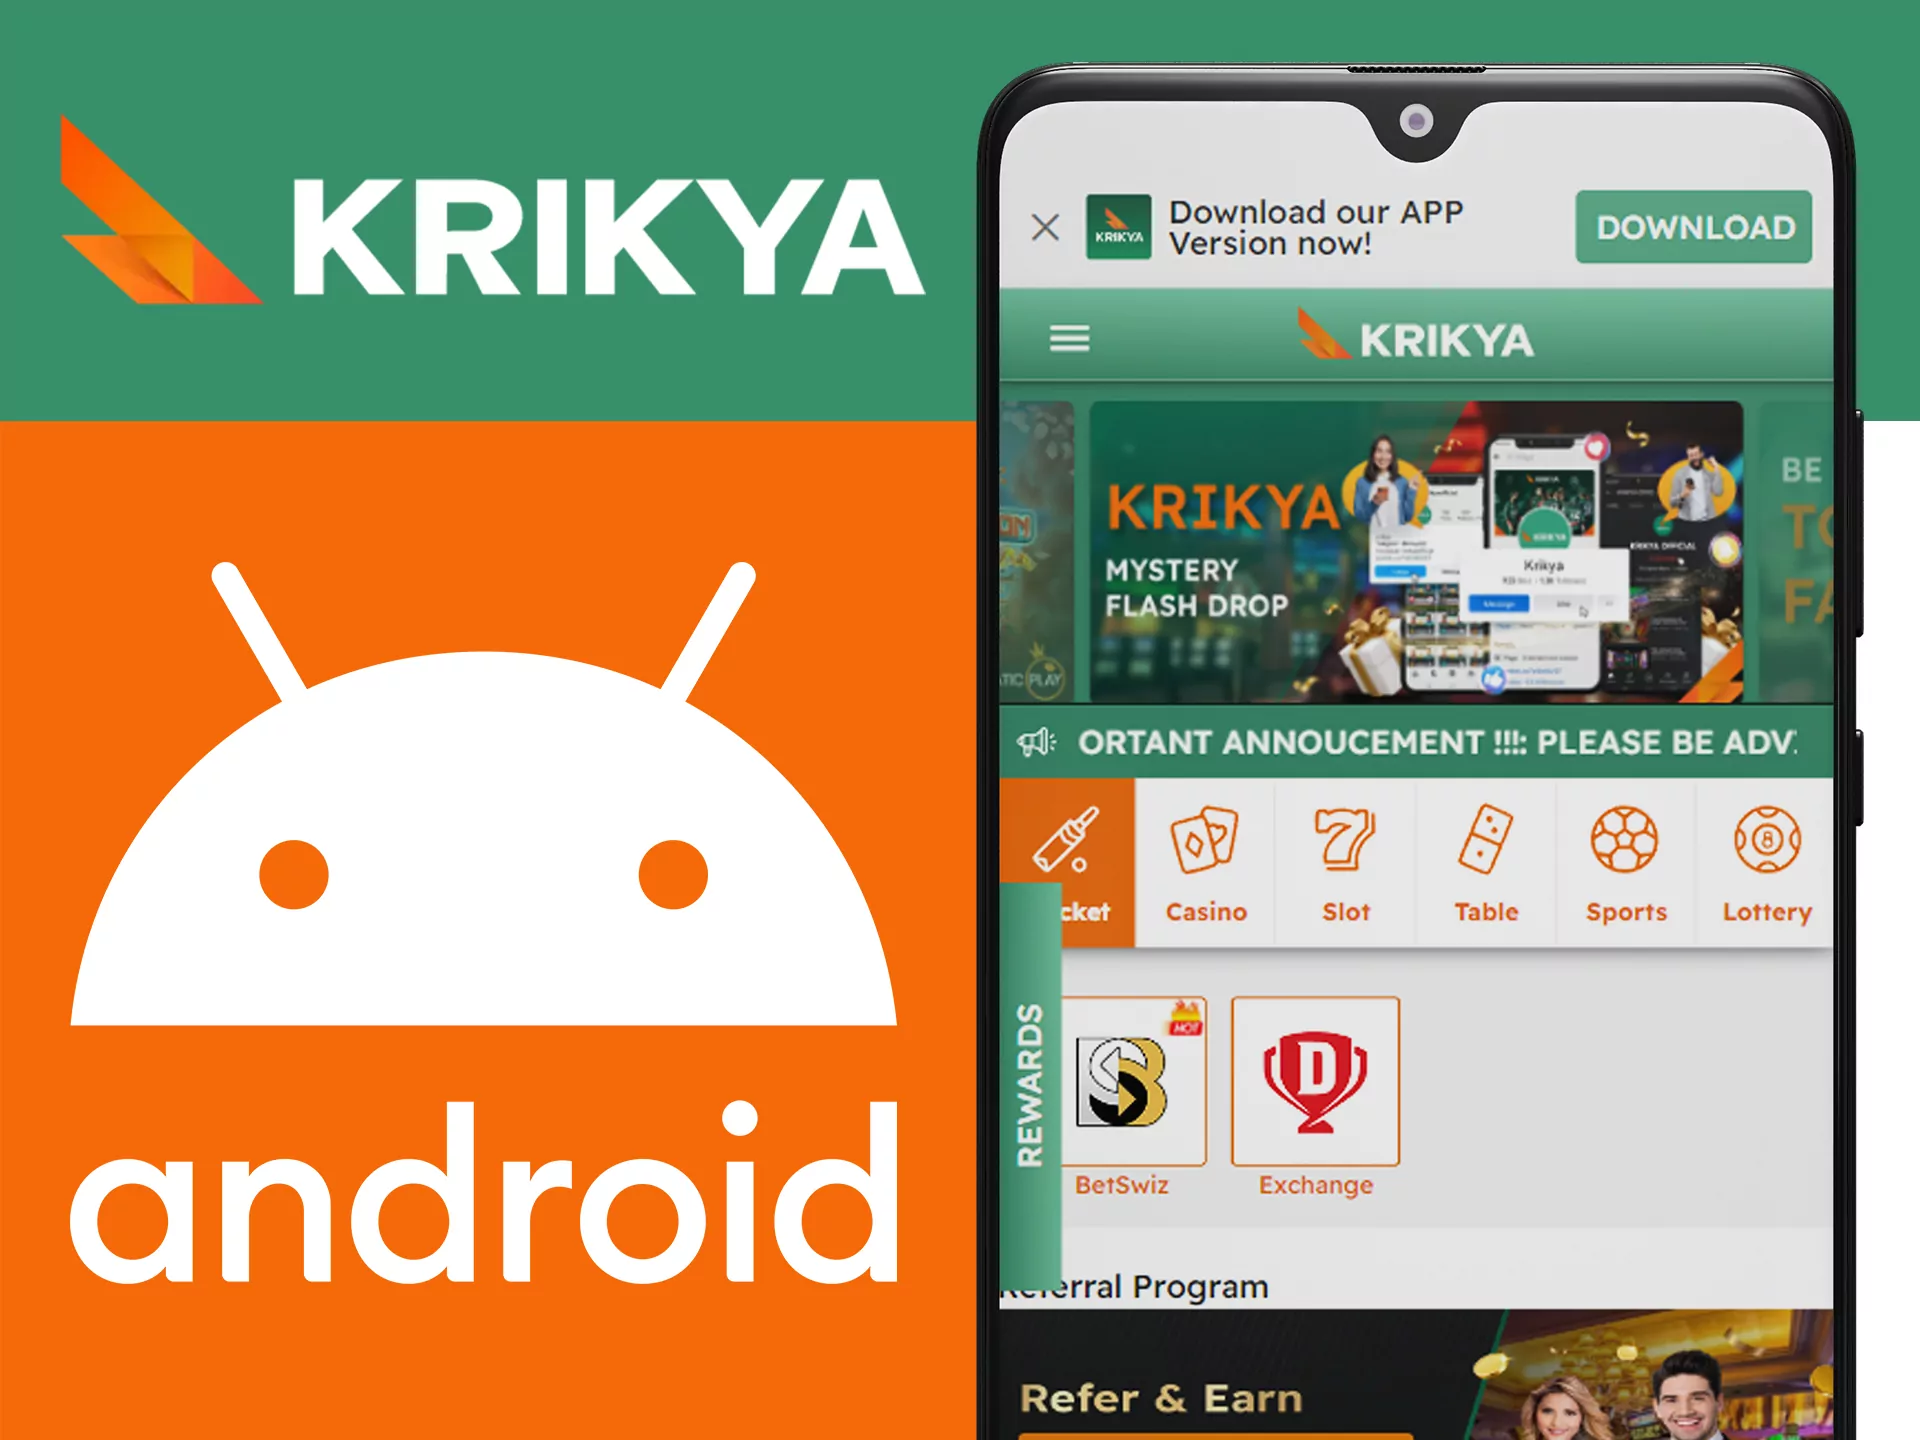 Install Krikya app on all of your Android devices.